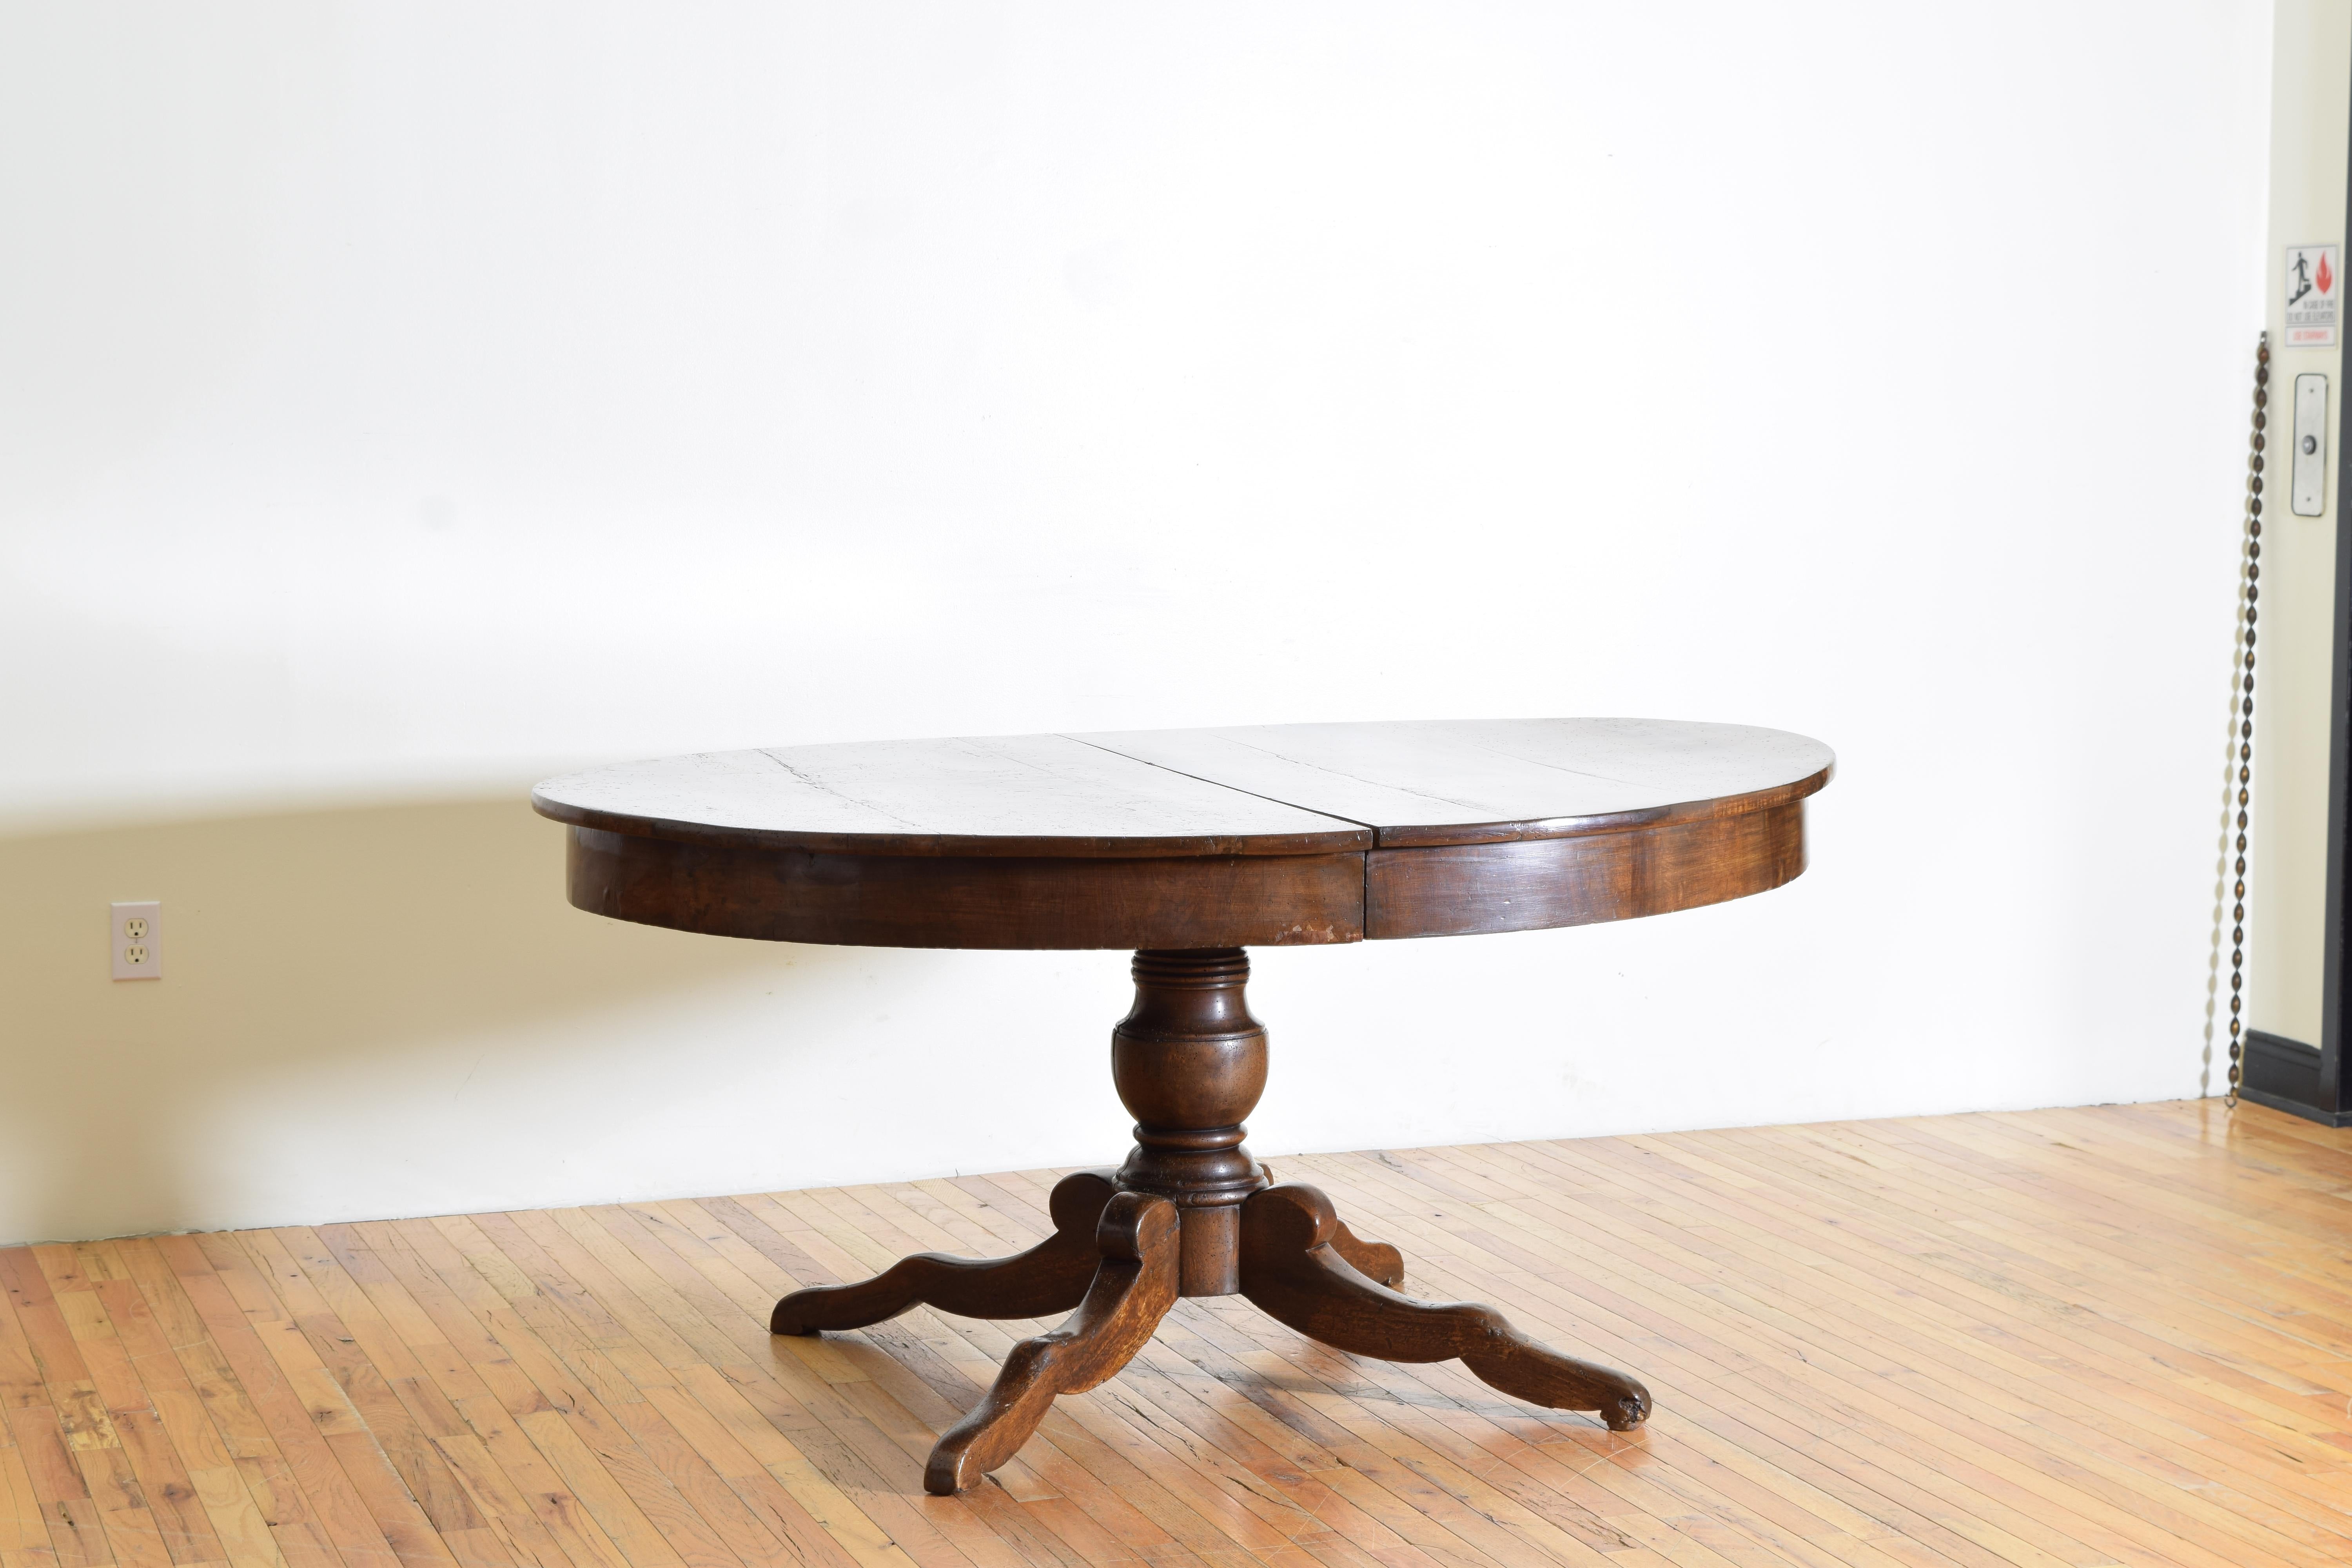 Neoclassical Italian, Tuscany, Neoclassic Solid Walnut Extension Dining Table, ca. 1840